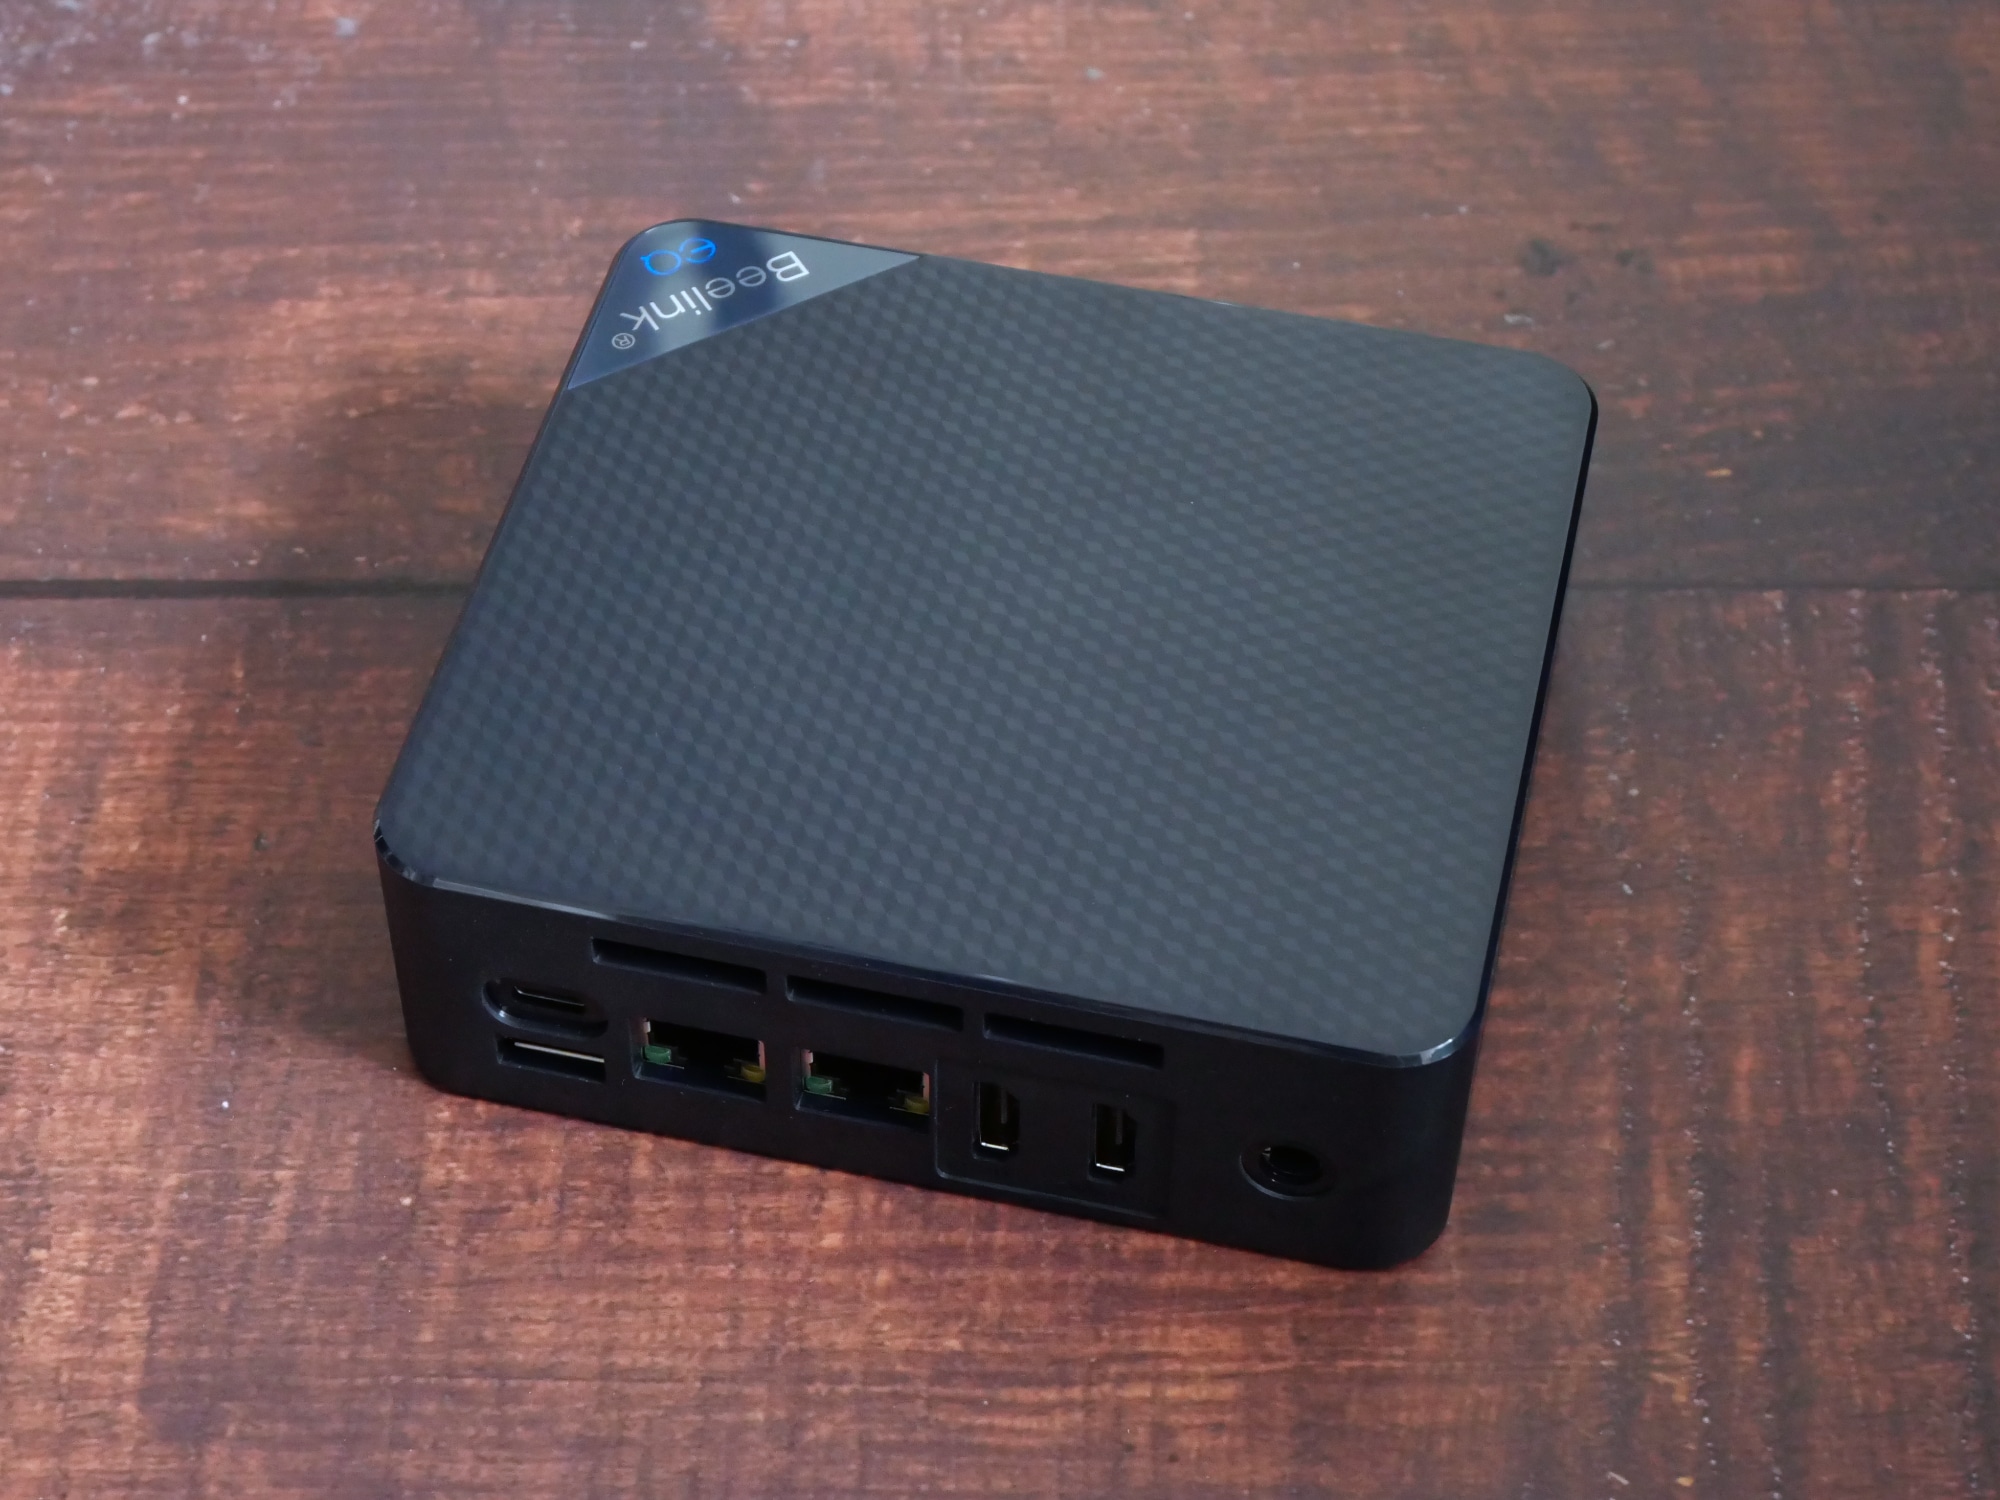 Beelink EQ12 Pro review - affordable mini PC with Intel Core i3